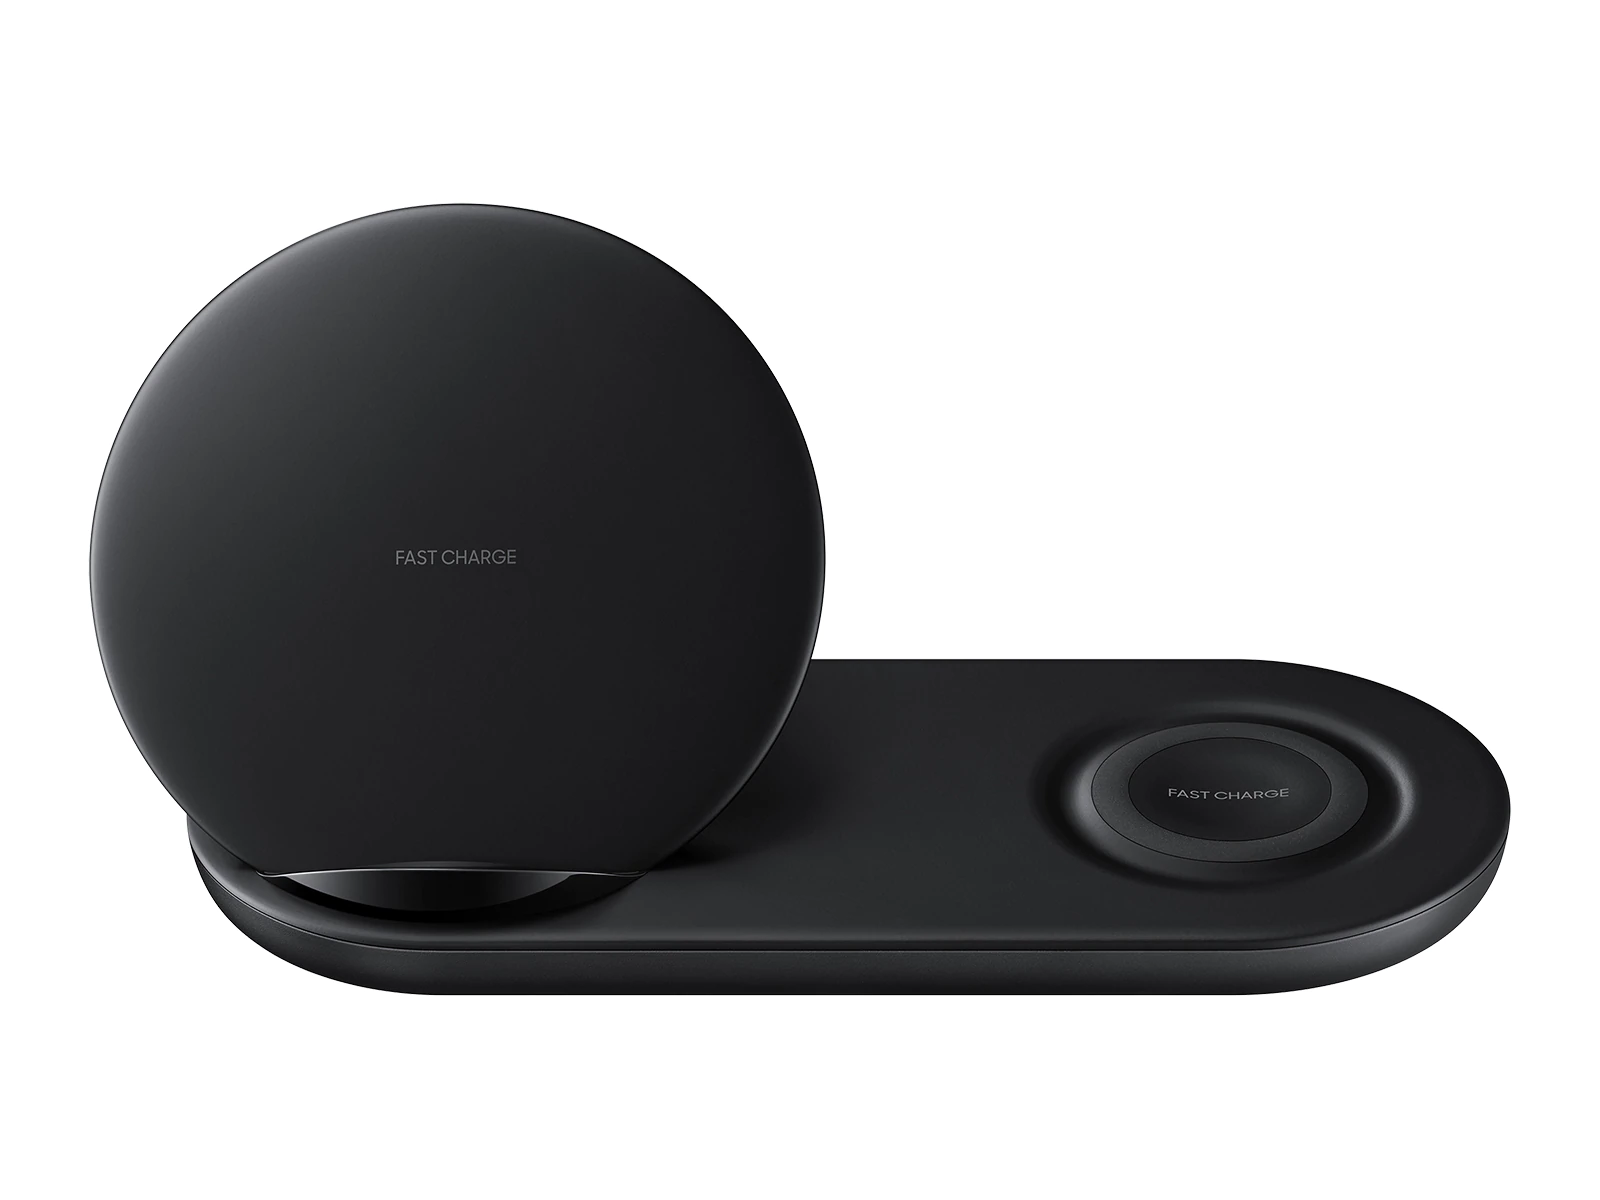 Forget Apple AirPower, Samsung’s Wireless Charger Duo is now available for just $65